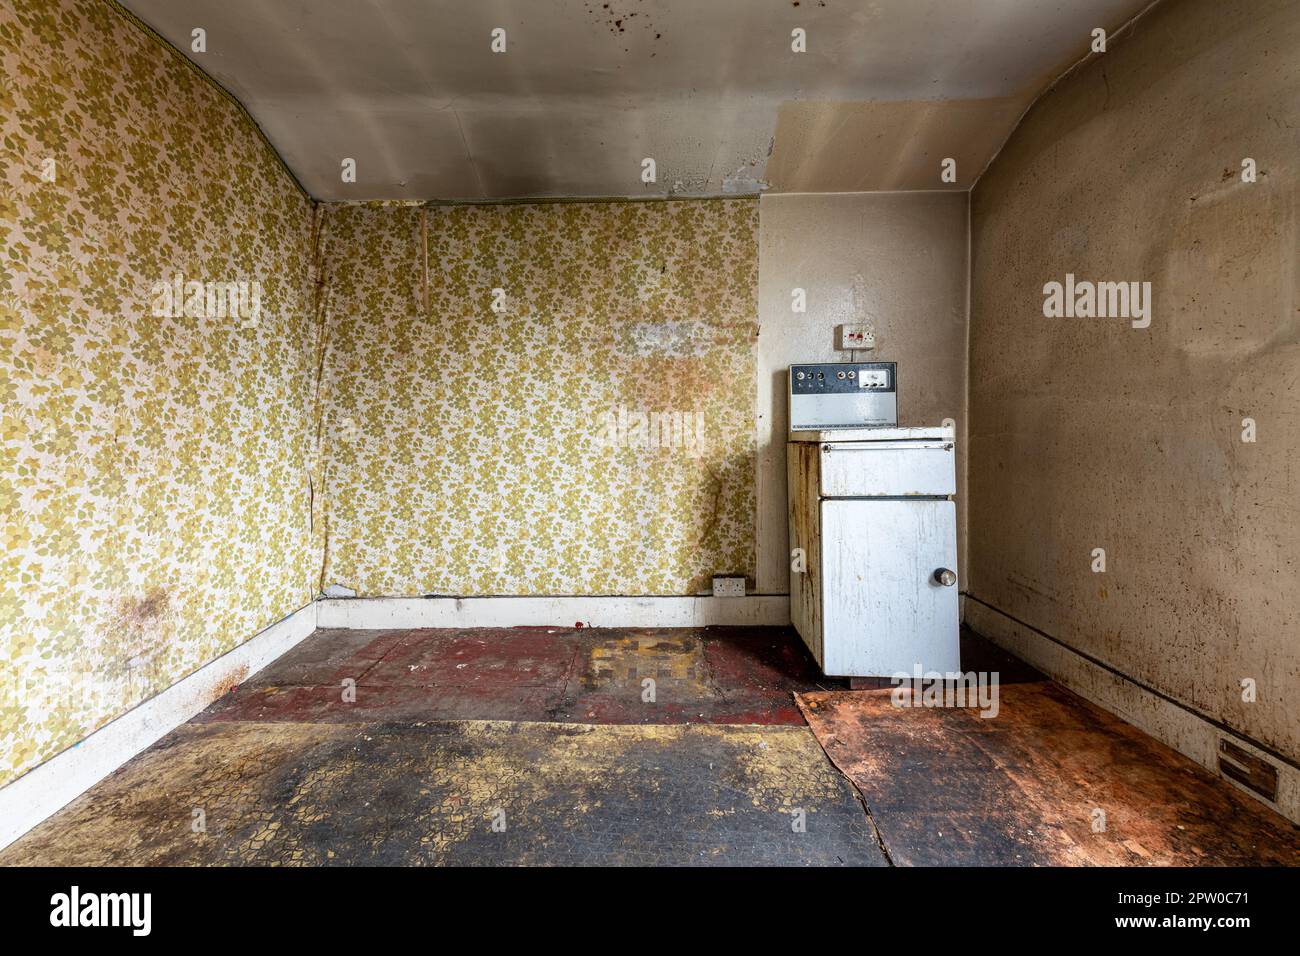 An old Gas cooker left in a filthy unmodernised Kitchen in South London. Stock Photo